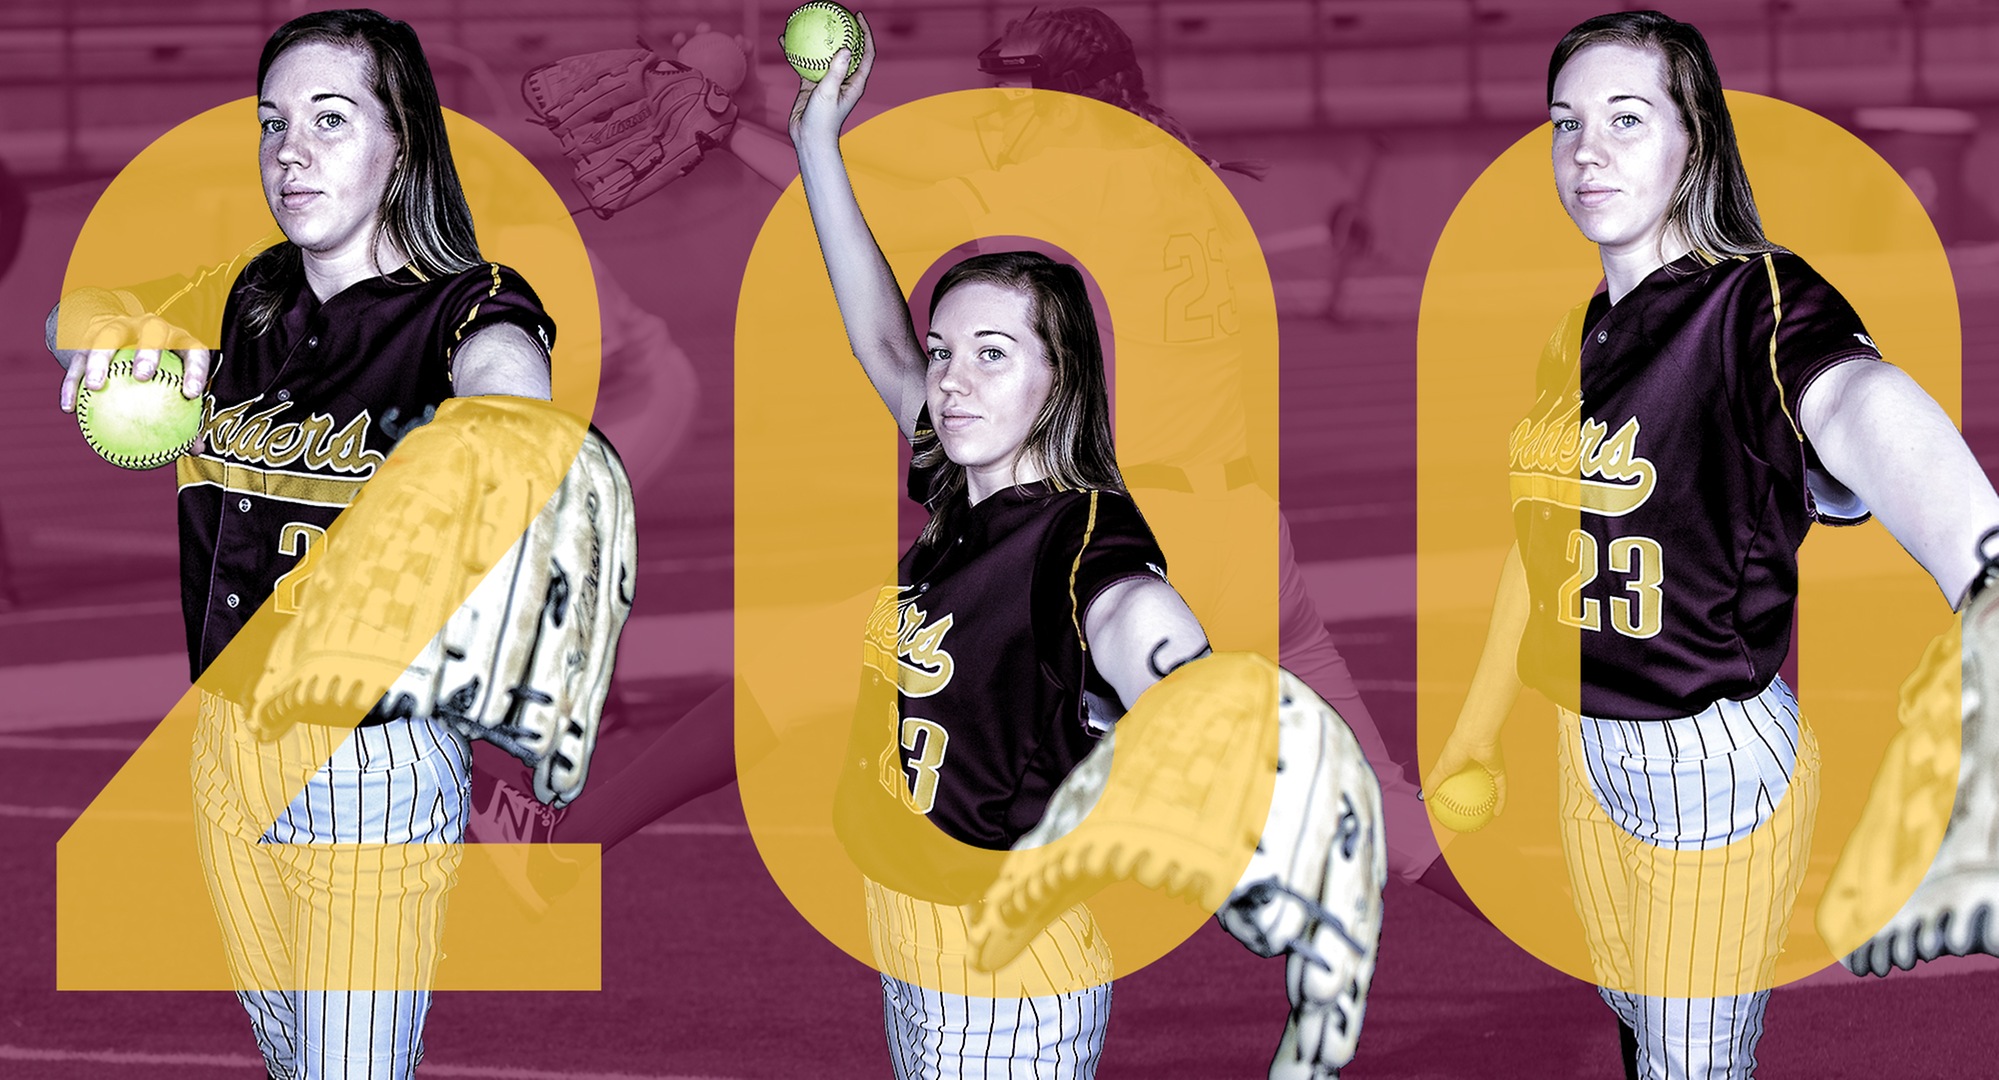 Megan Gavin struck out six in the first game at St. Olaf to become the fifth Cobber in school history to reach the 200 strikeout mark.